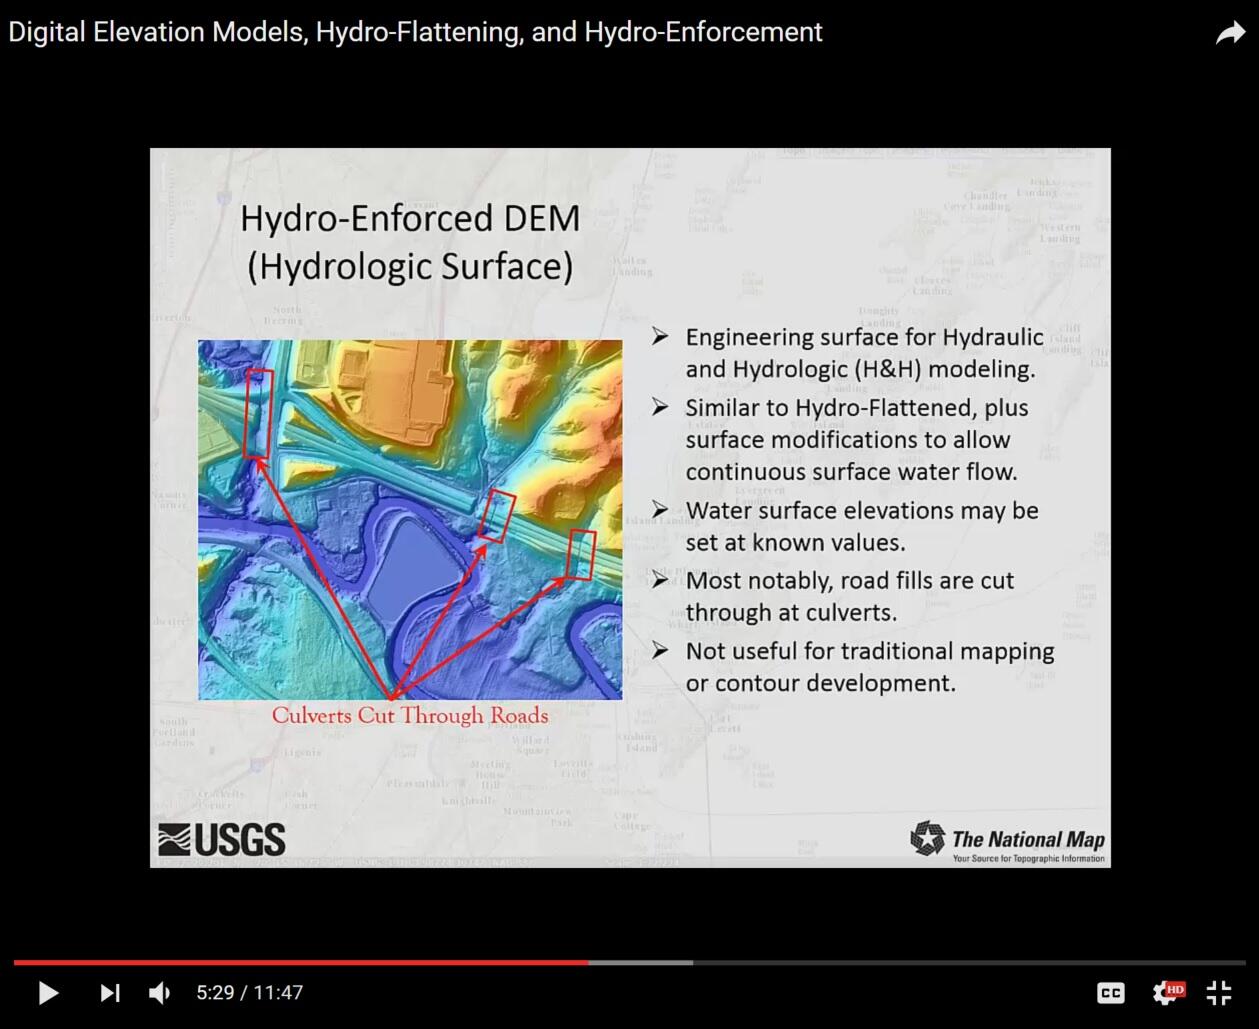 Screen shot, example of The National Map YouTube Video: Digital Elevation Models, Hydro-Flattening and Hydro-Enforcement.